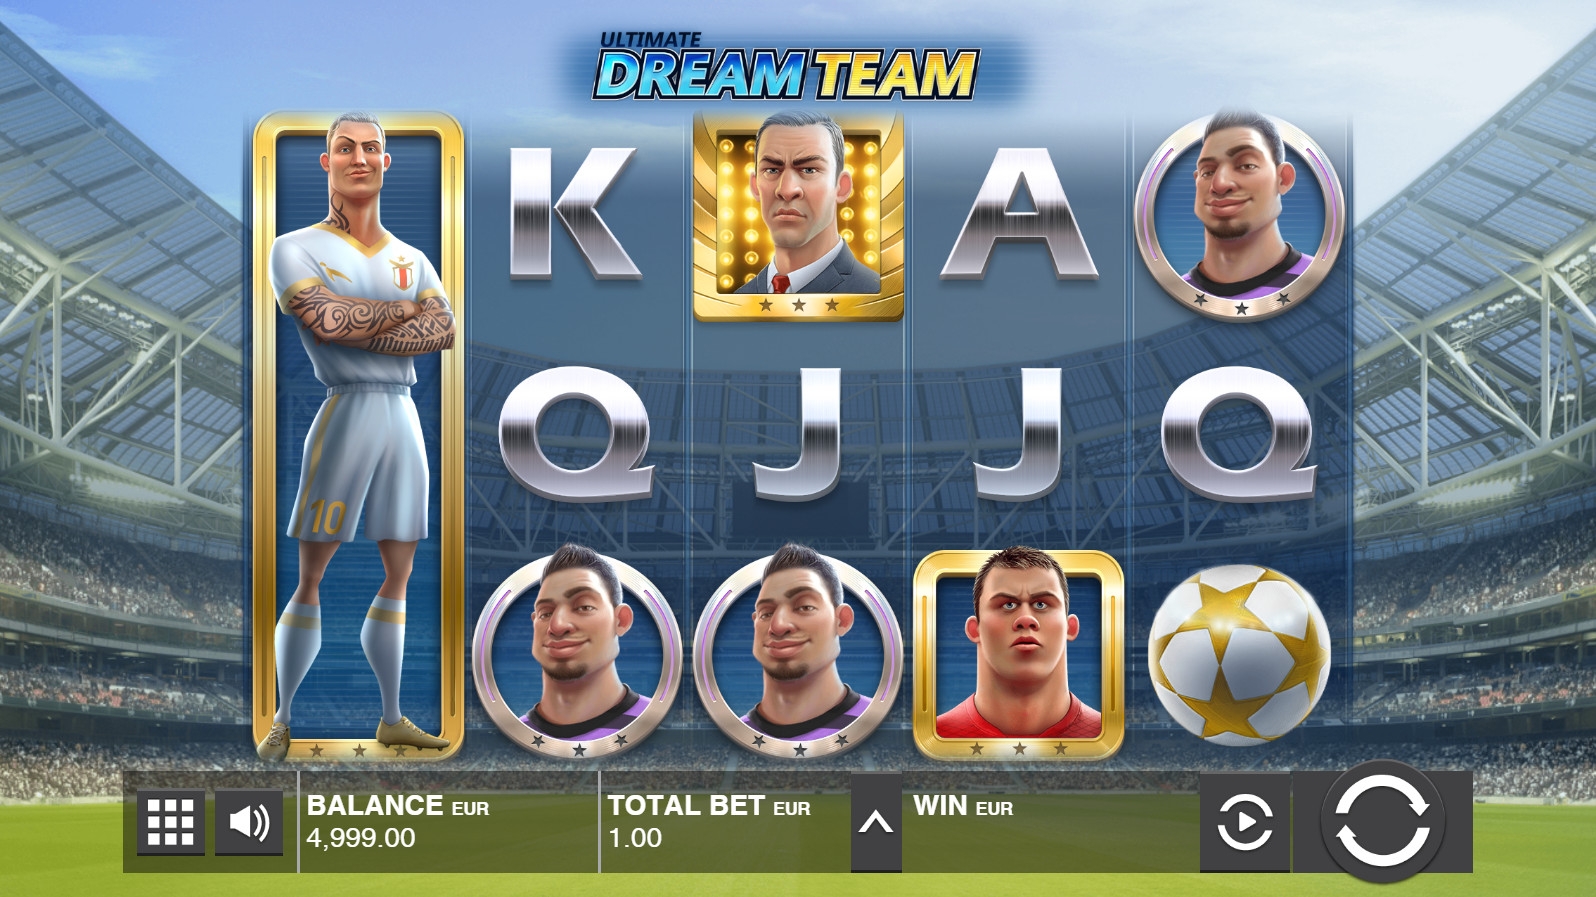 Ultimate Dream Team (Ultimate Dream Team) from category Slots